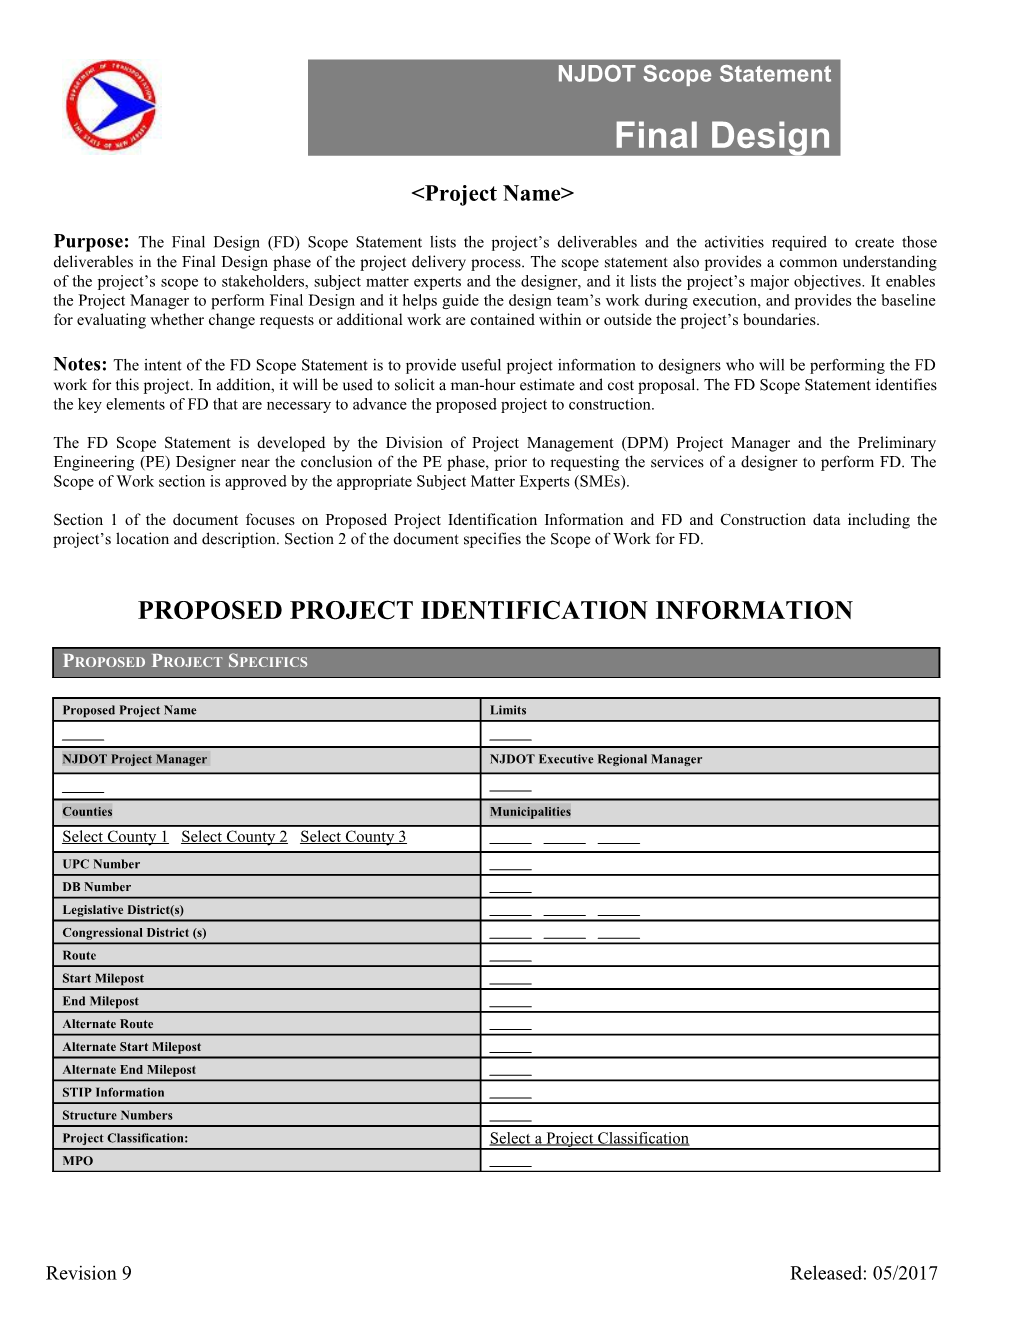 Final Design Phase Scope Statement Template